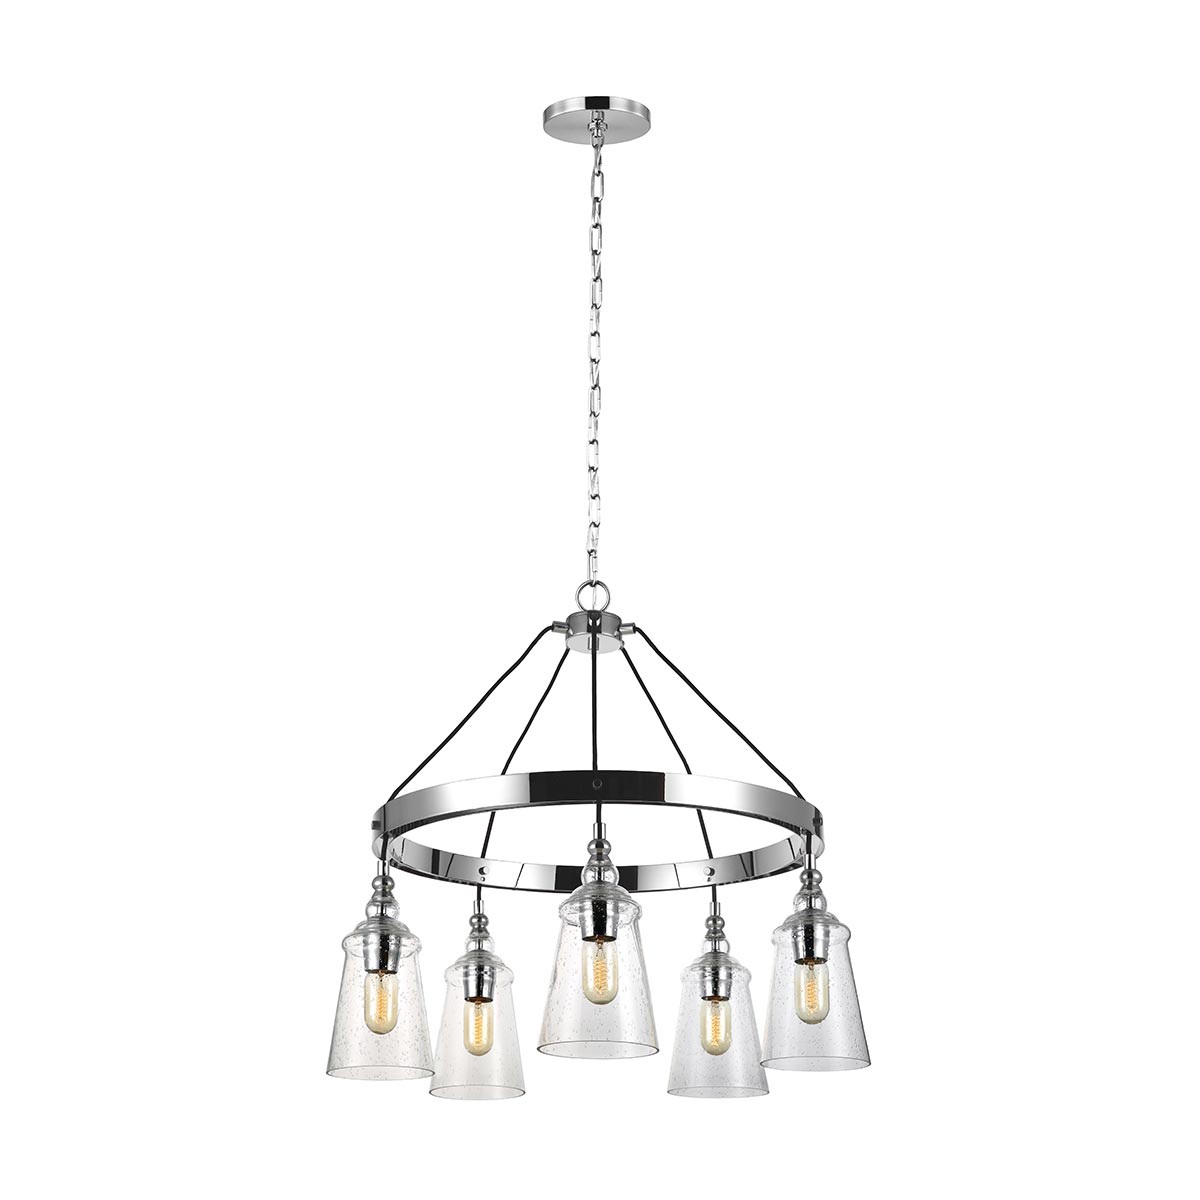 Loras Polished Chrome 5 Light Chandelier Pendant Seeded Glass Shades